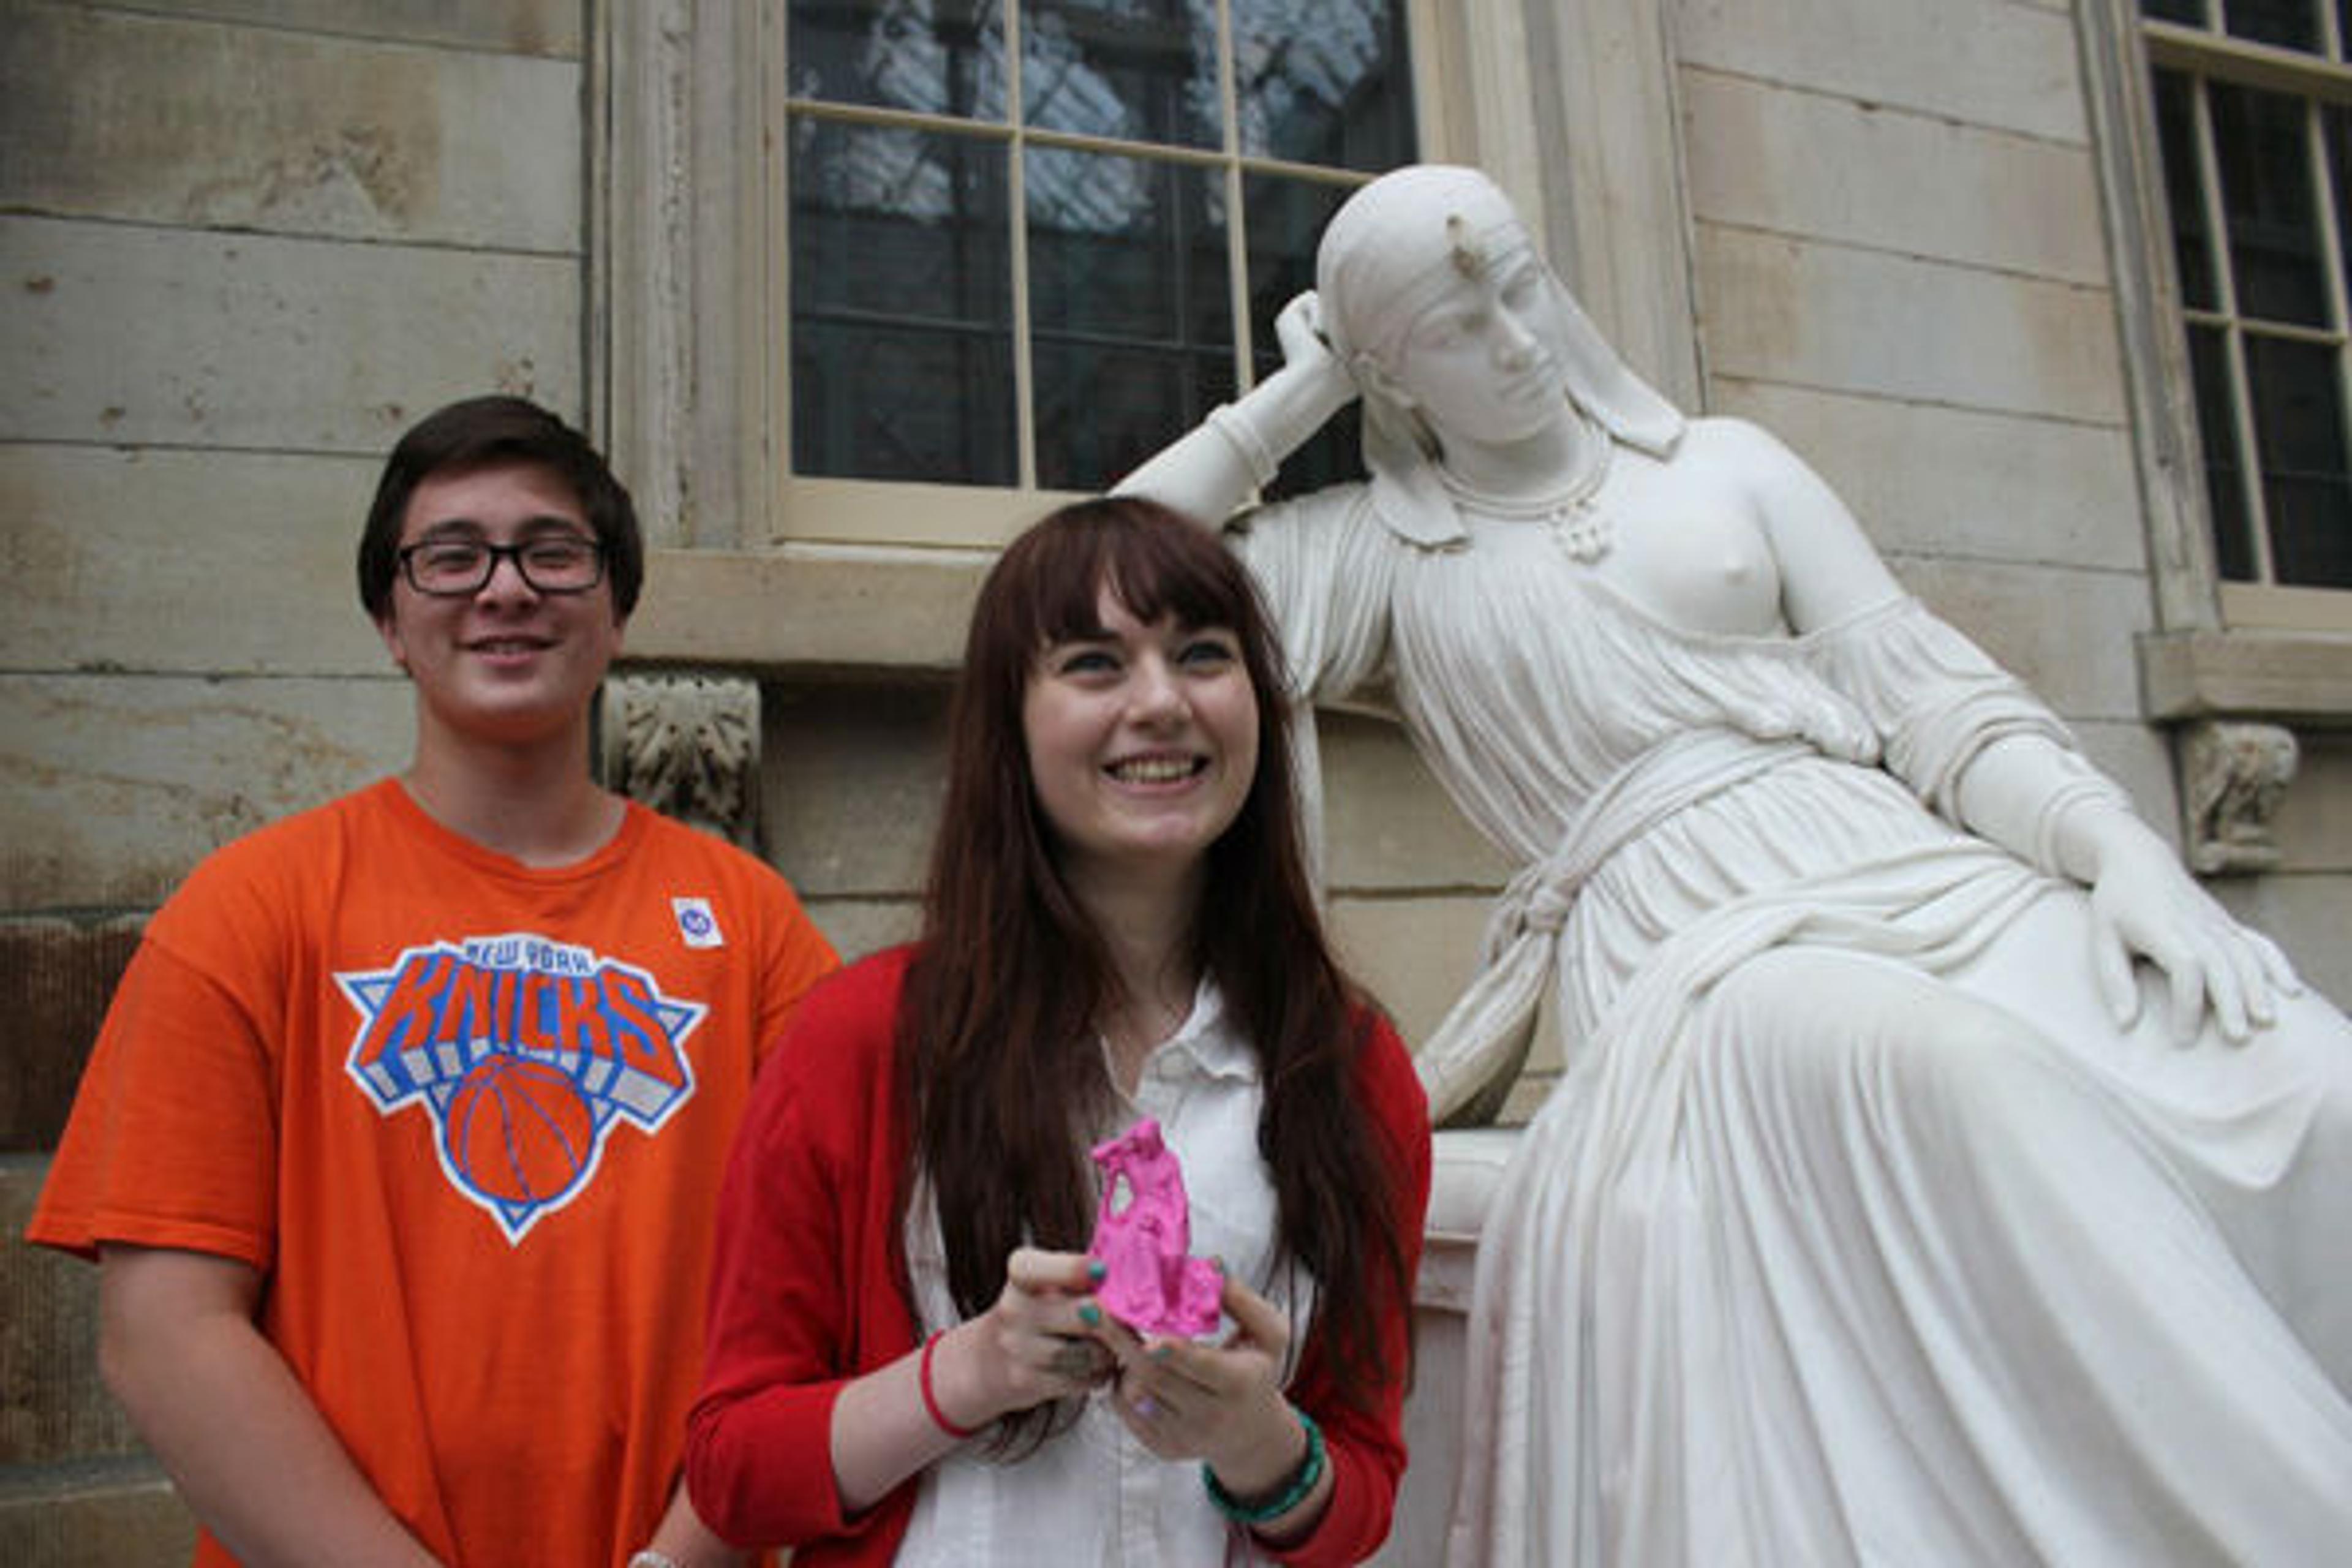 Nathaniel and Alison with the sculpture Cleopatra and their creation